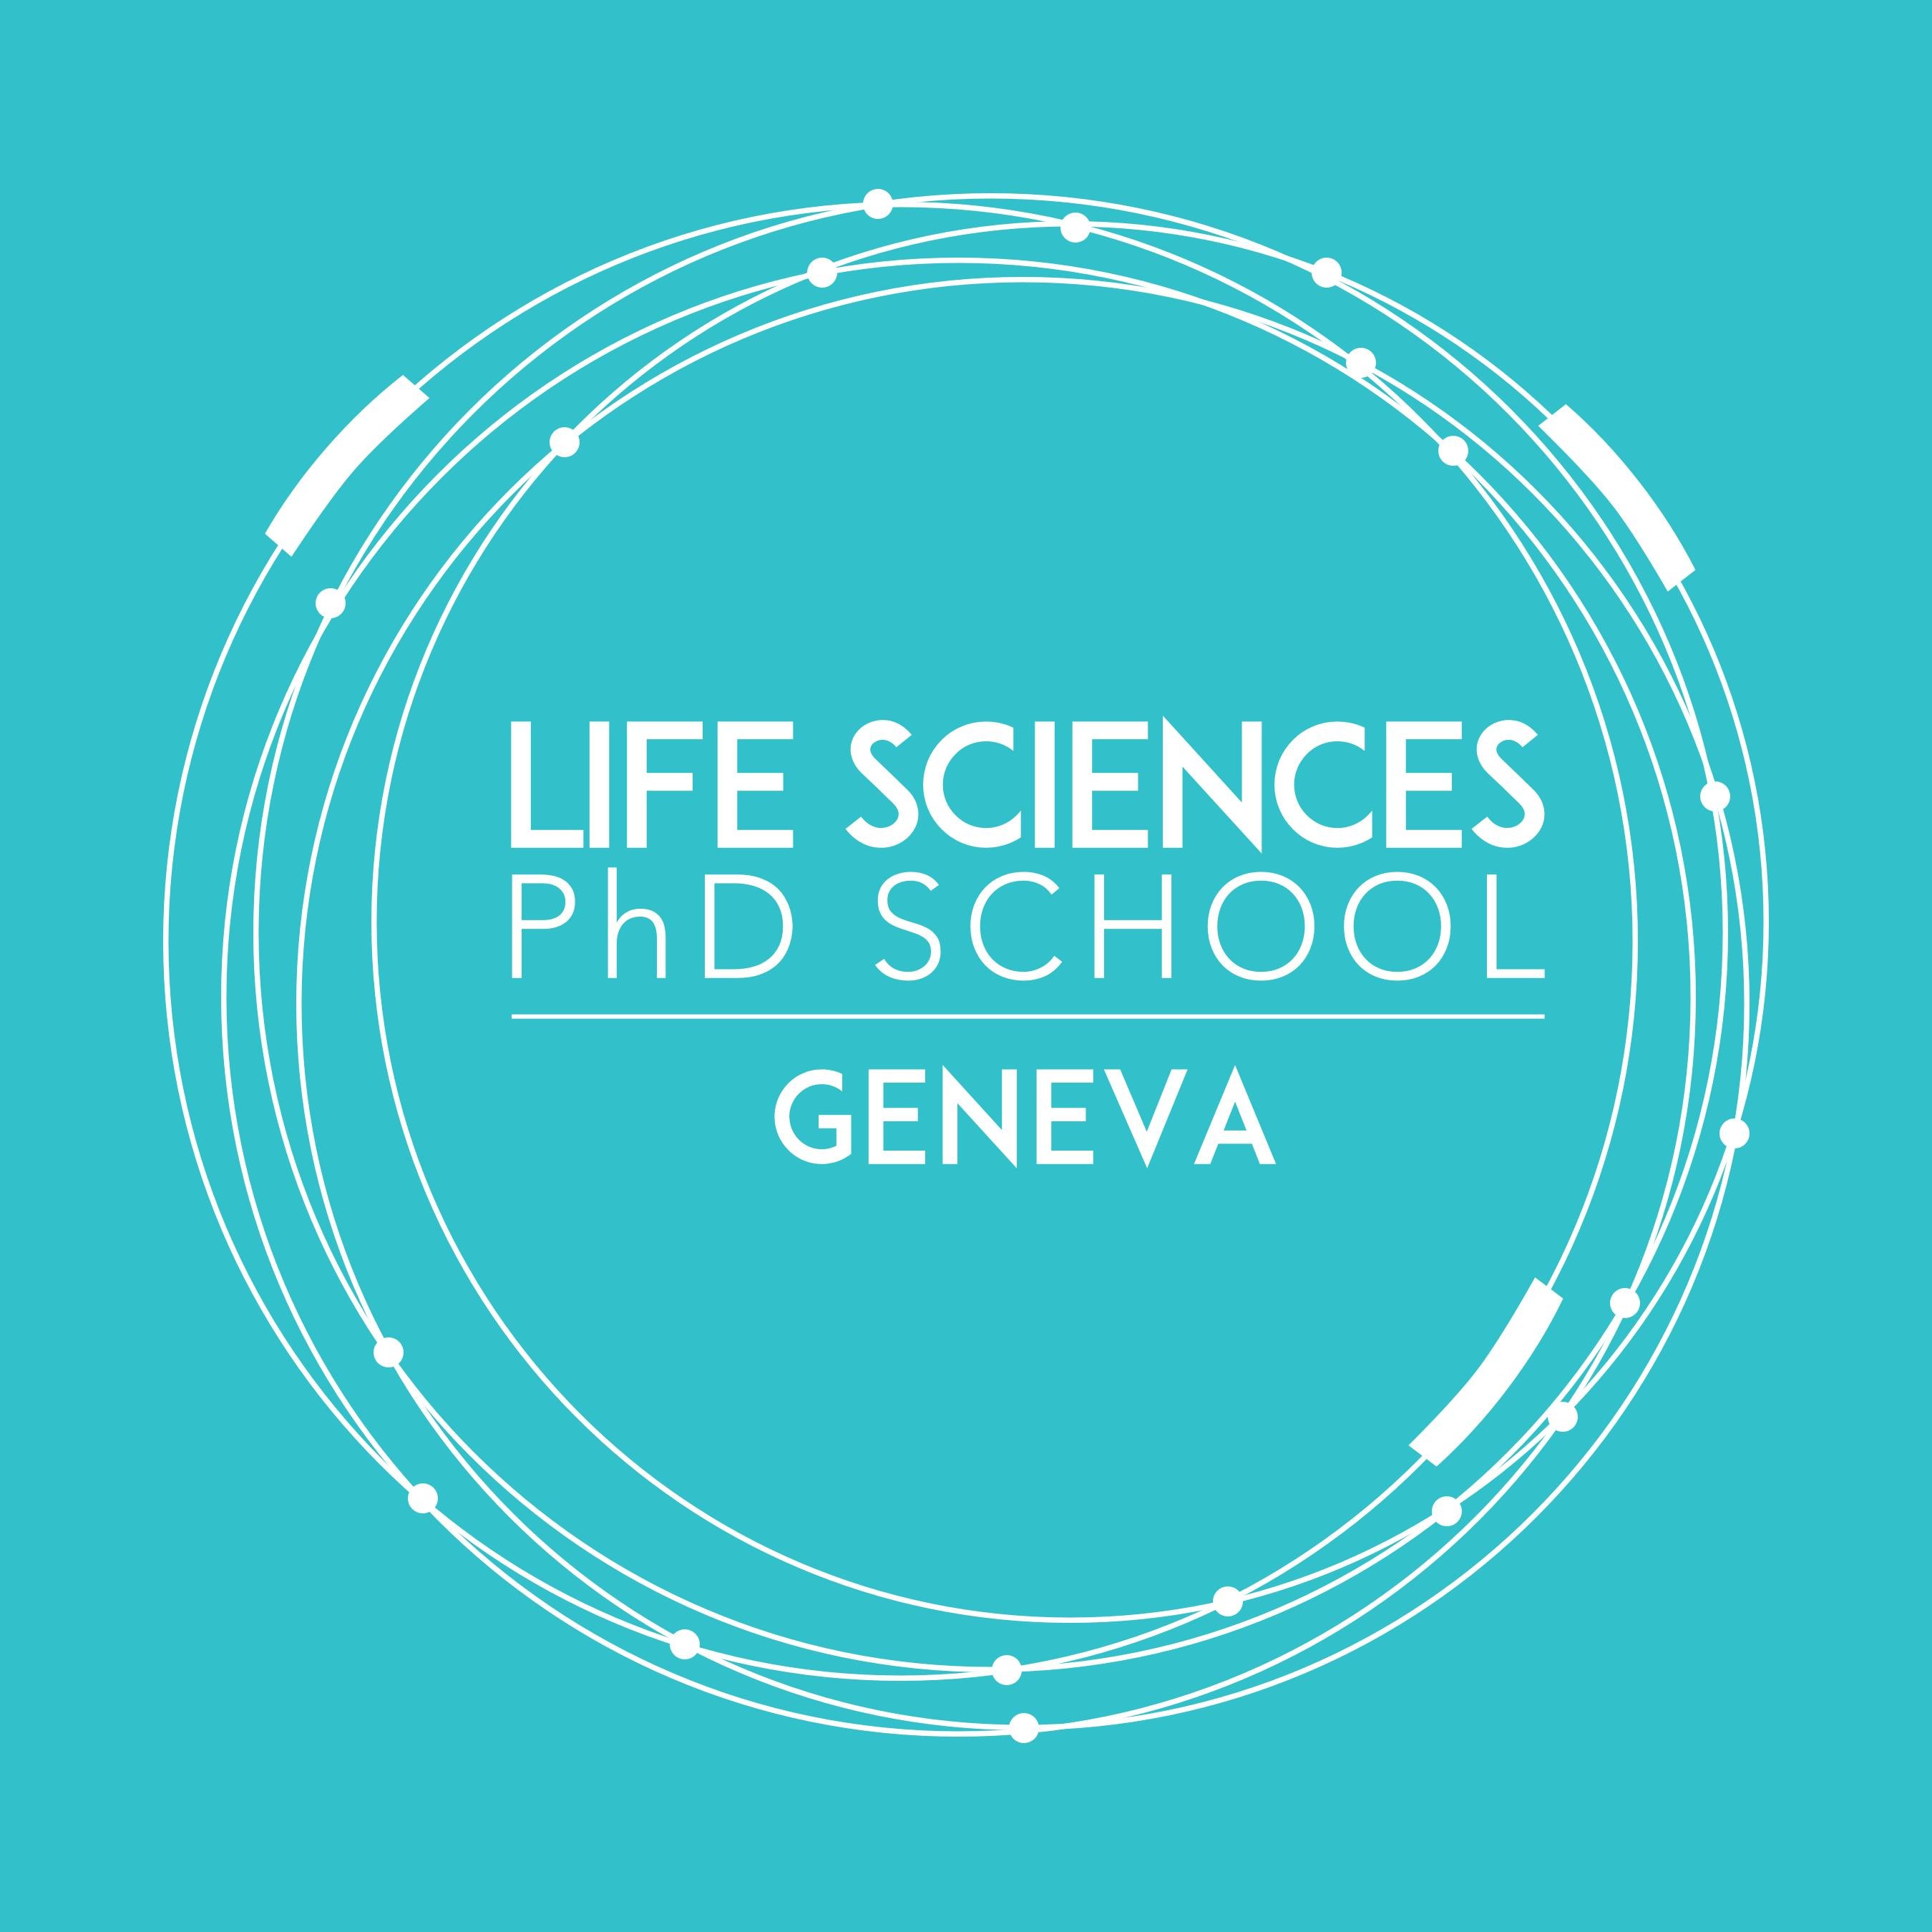 Join our young, interdisciplinary community in Molecular Biology, Biomedical & Pharmaceutical Sciences, Ecology & Evolution, Biophysics, Genomics & eHealth!